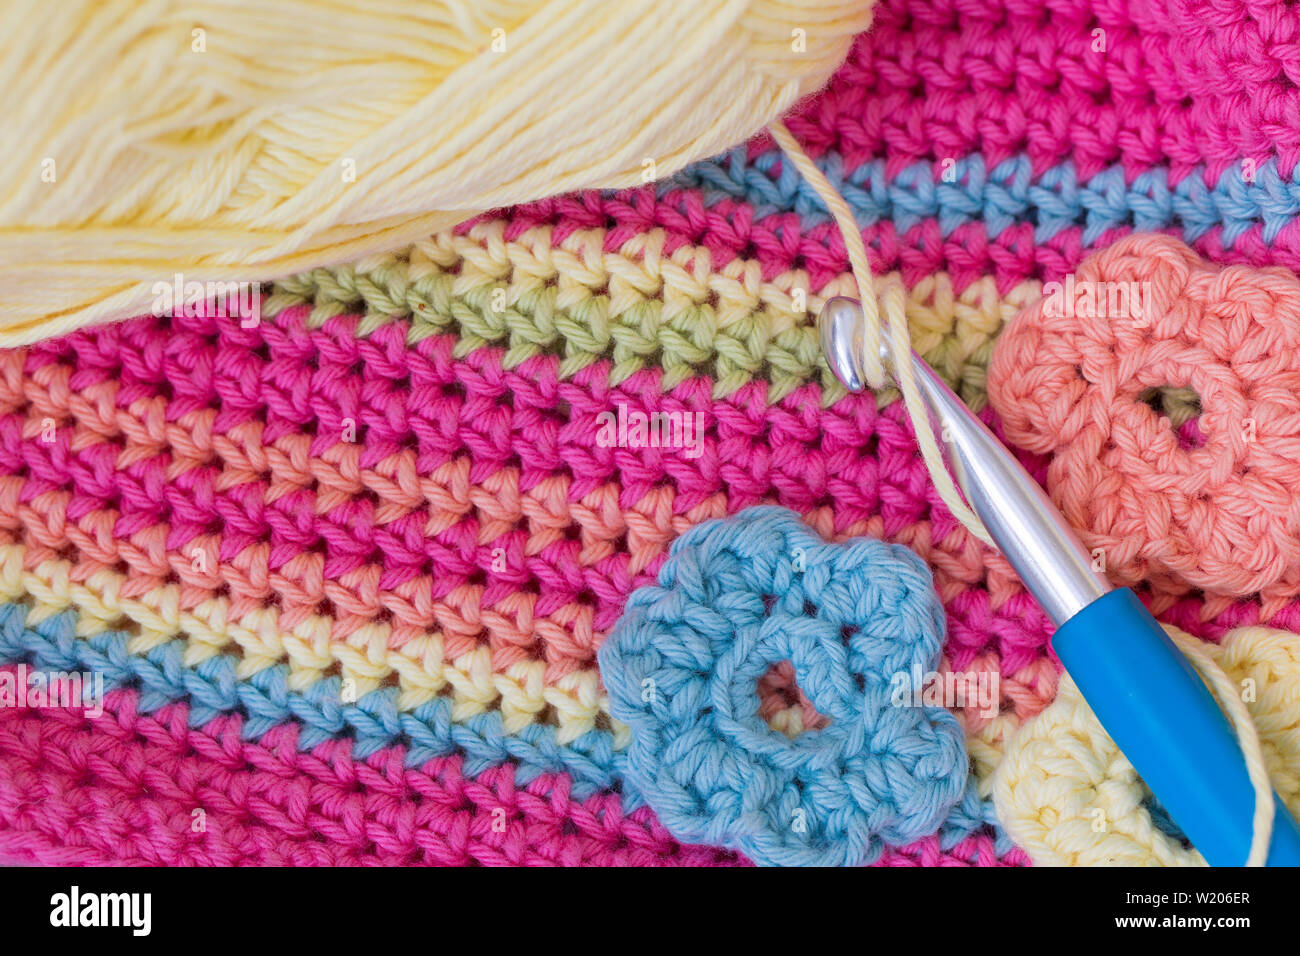 Crocheted colorful background with crochet hook and a wool ball Stock Photo